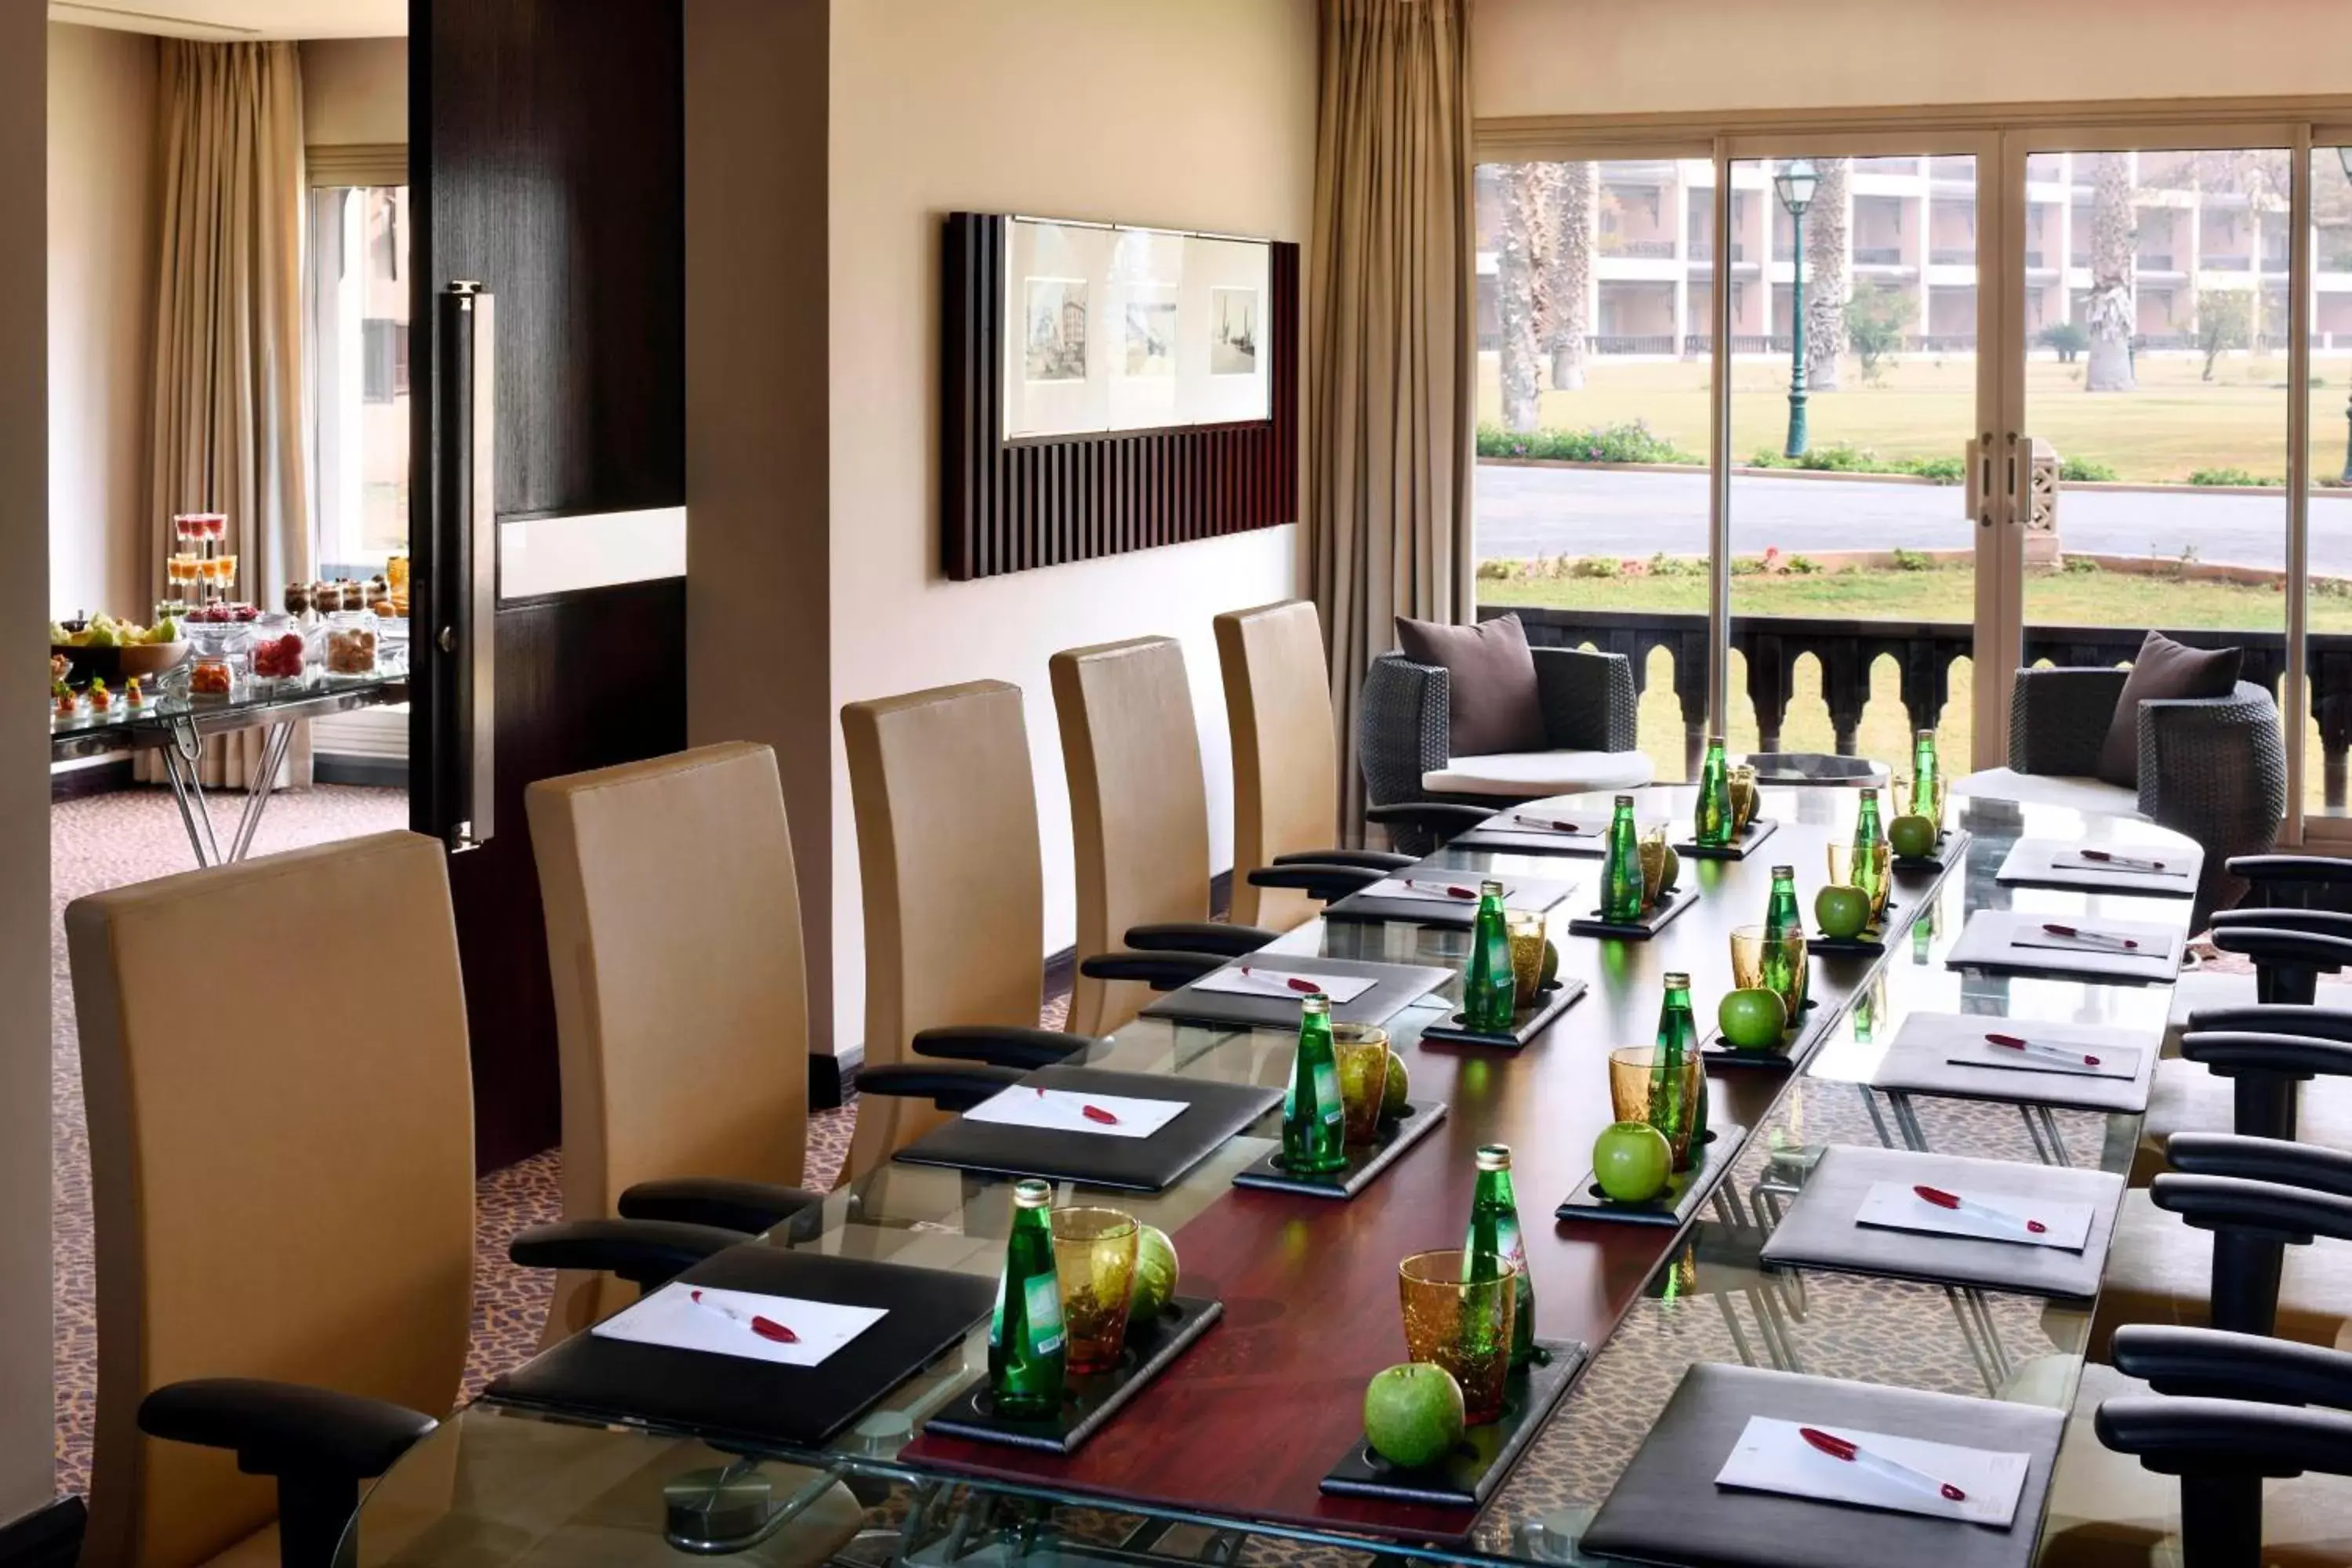 Meeting/conference room in Marriott Mena House, Cairo